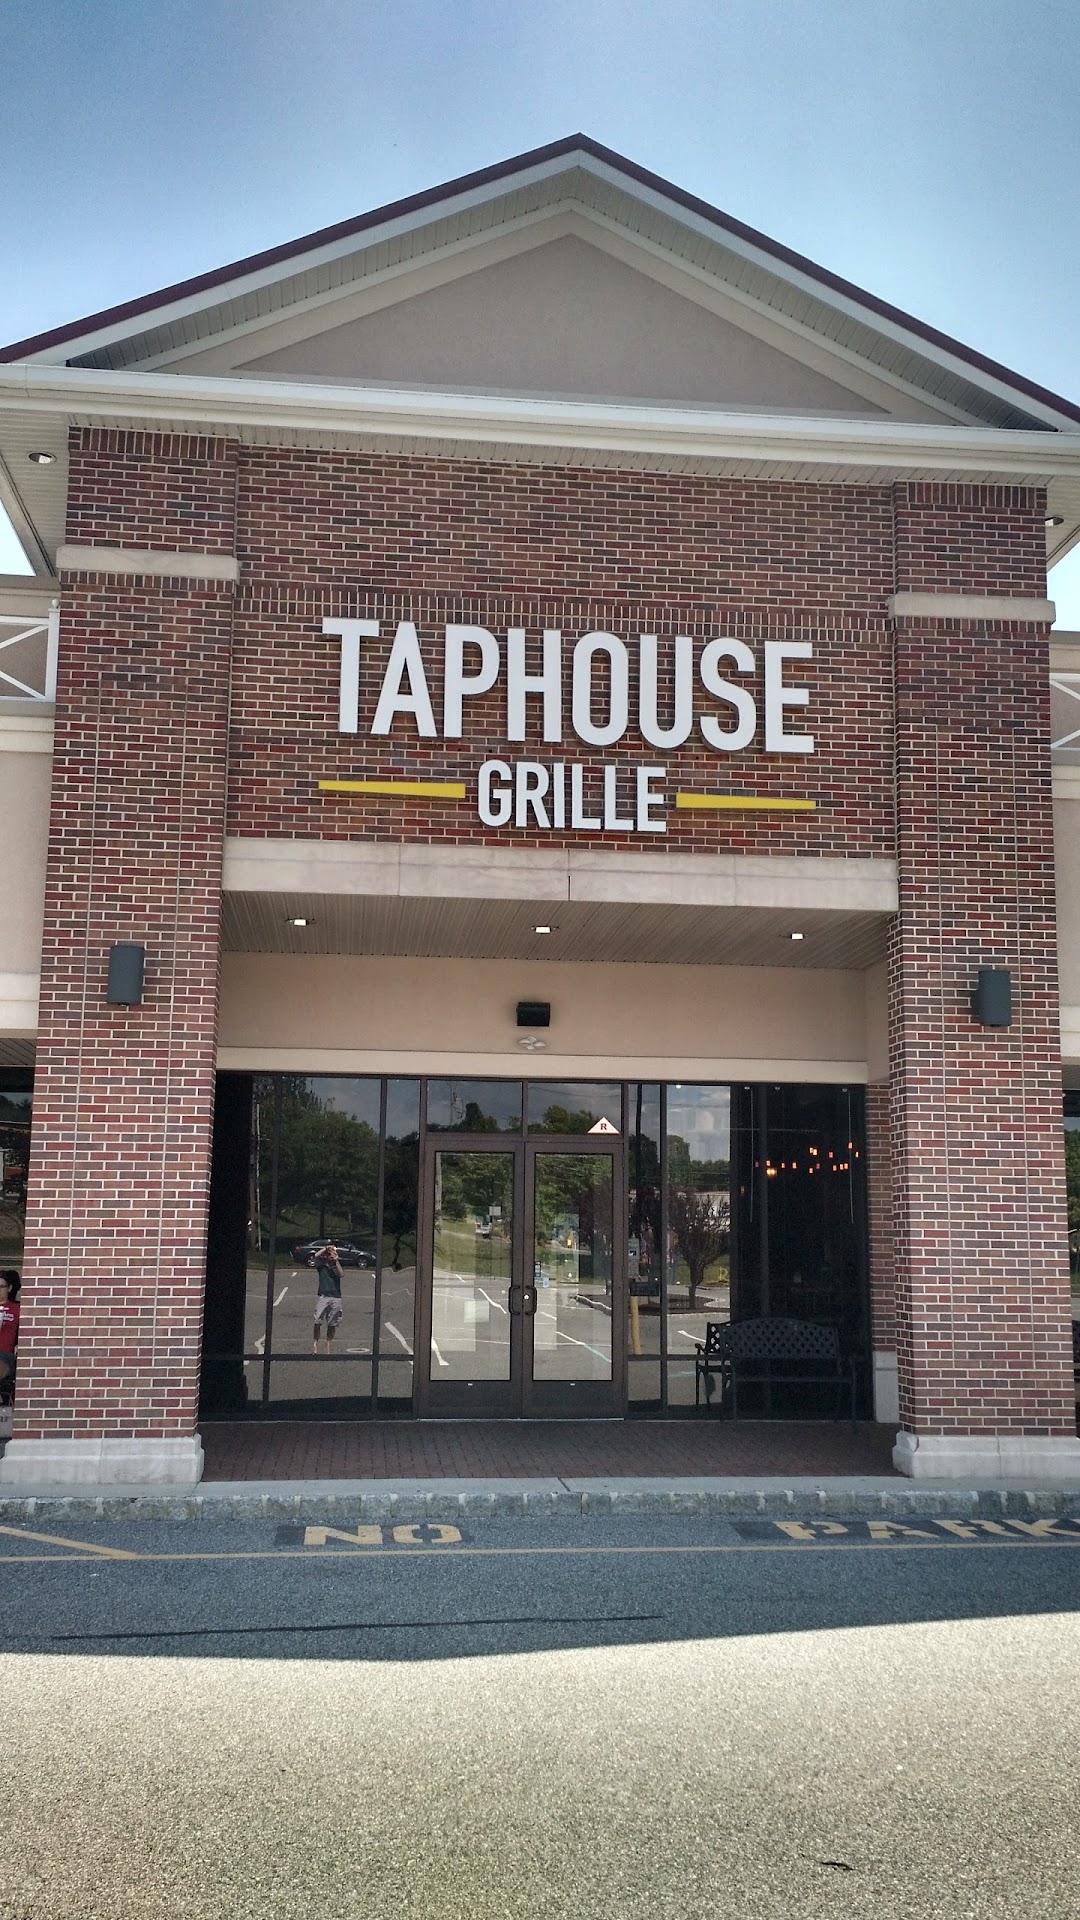 Taphouse Grille